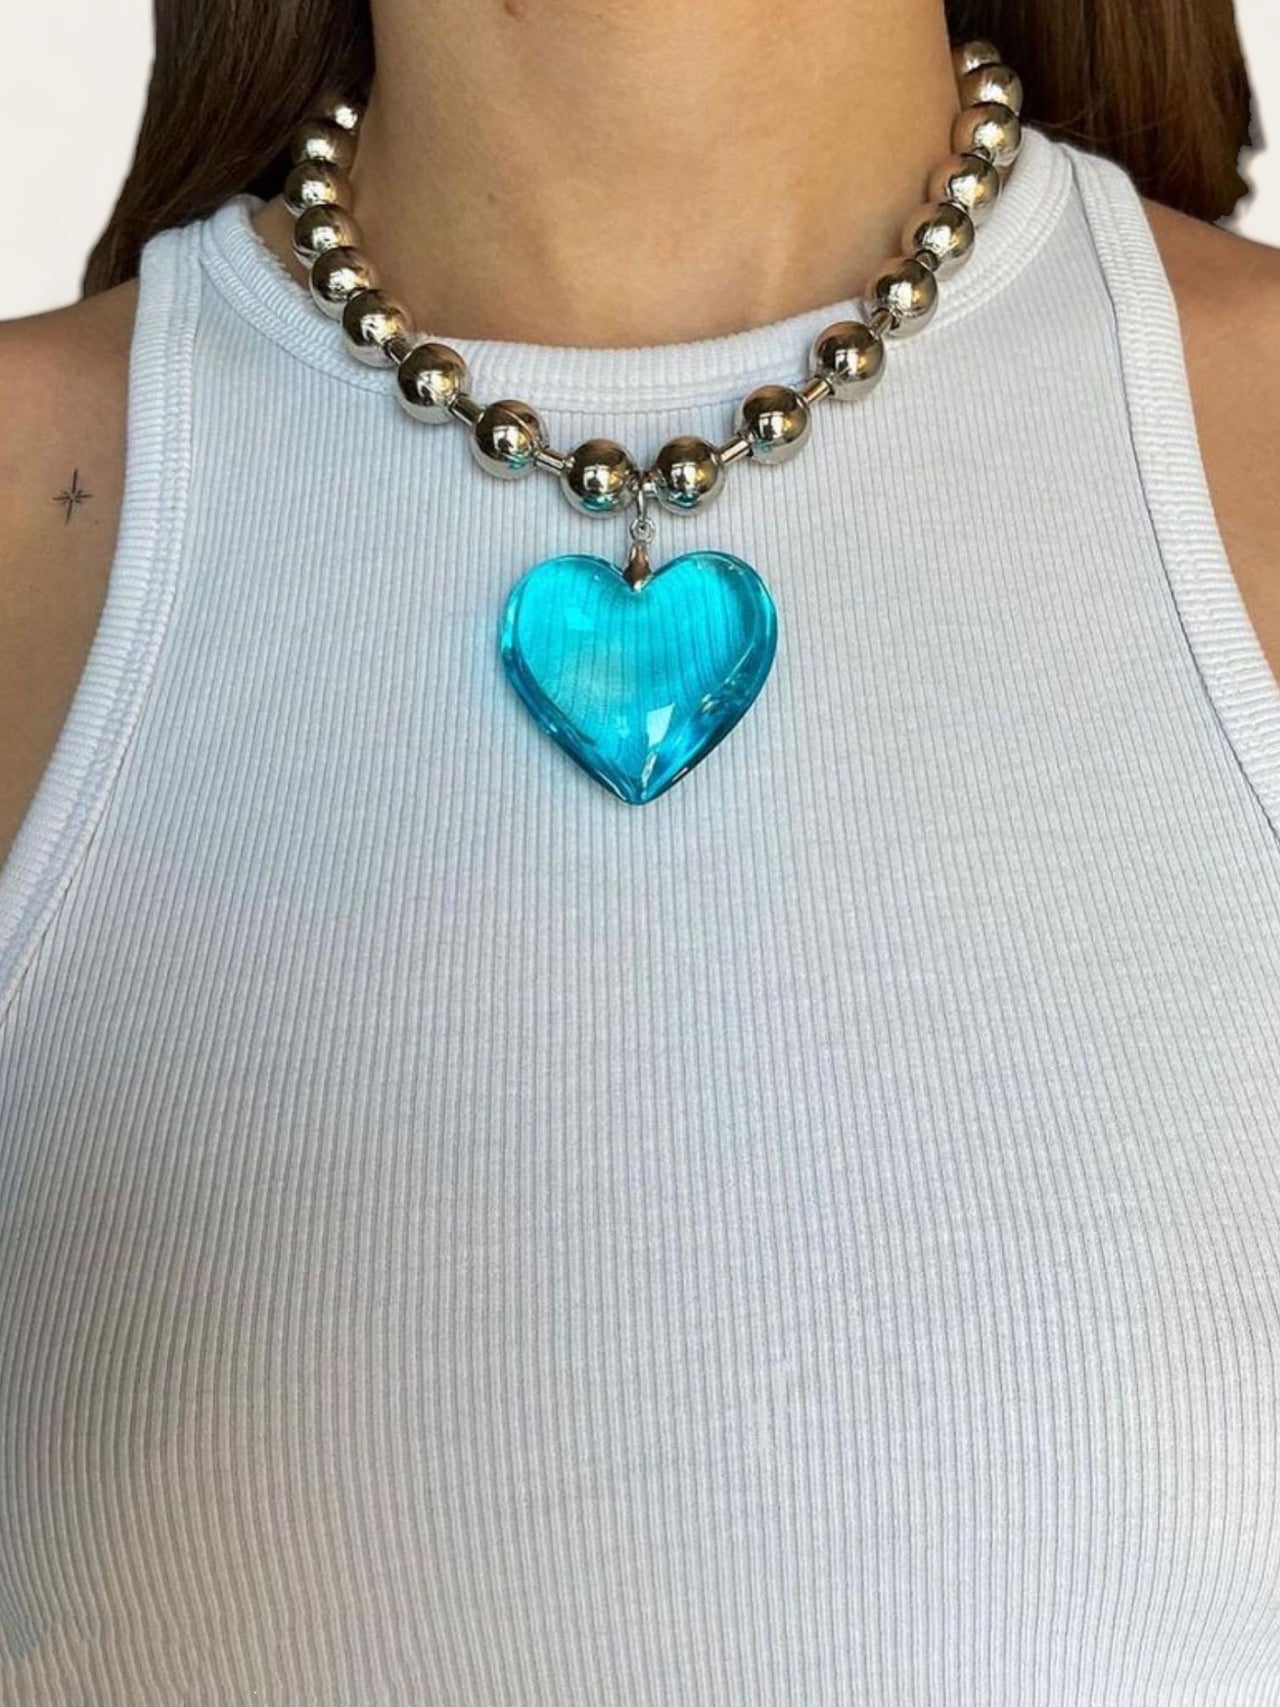 Darling Necklace - Baby Blue